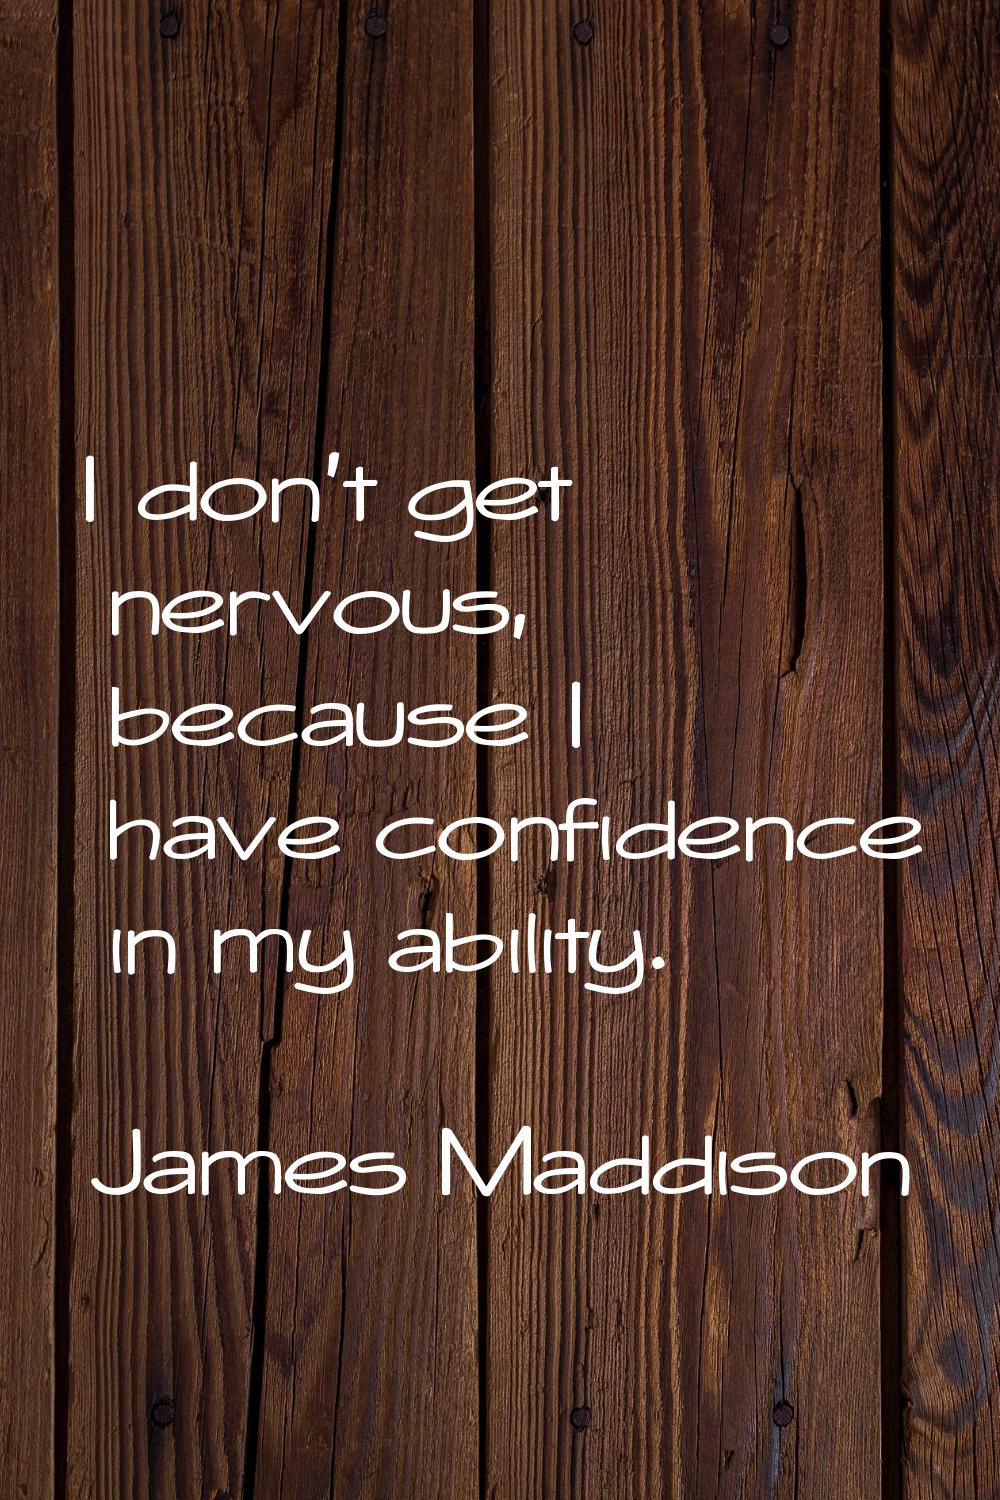 I don't get nervous, because I have confidence in my ability.